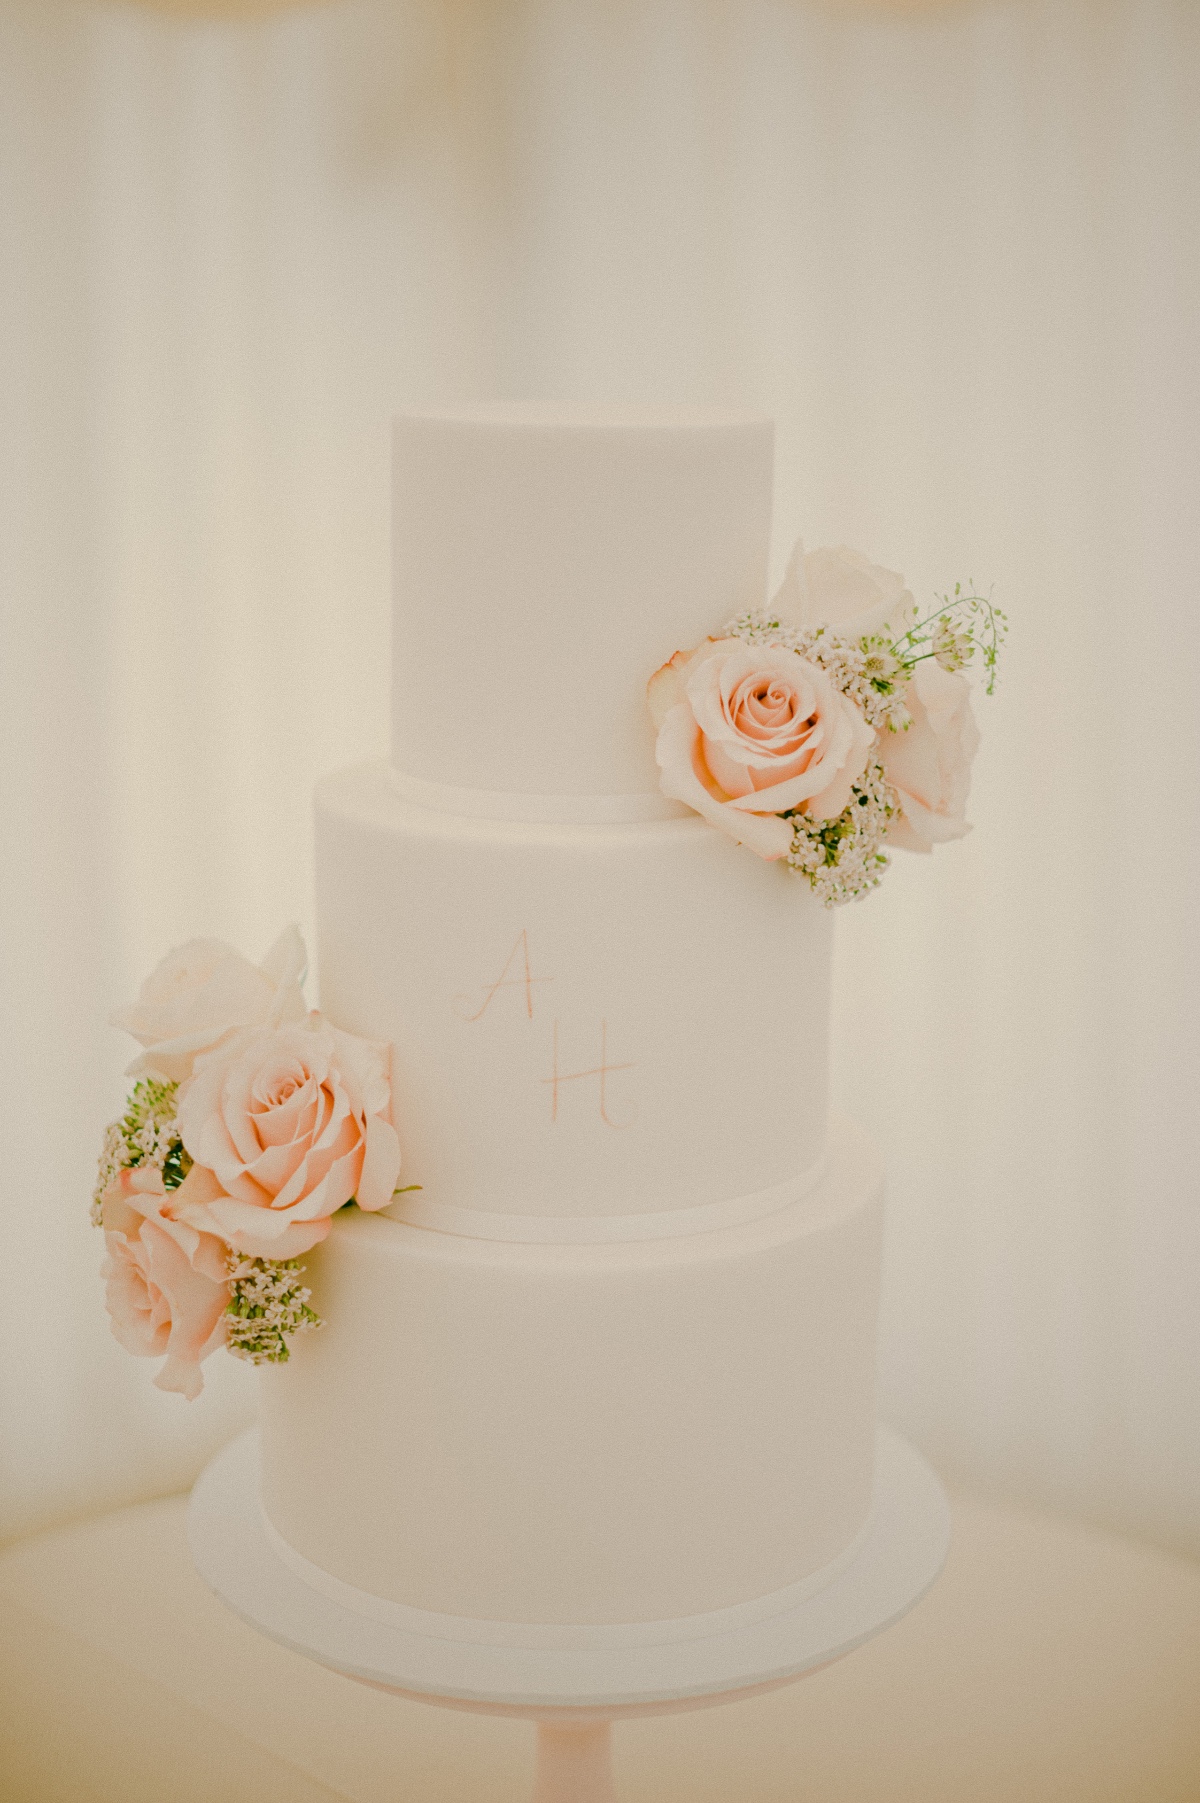 Dotty Rose wedding cake adorned with florals